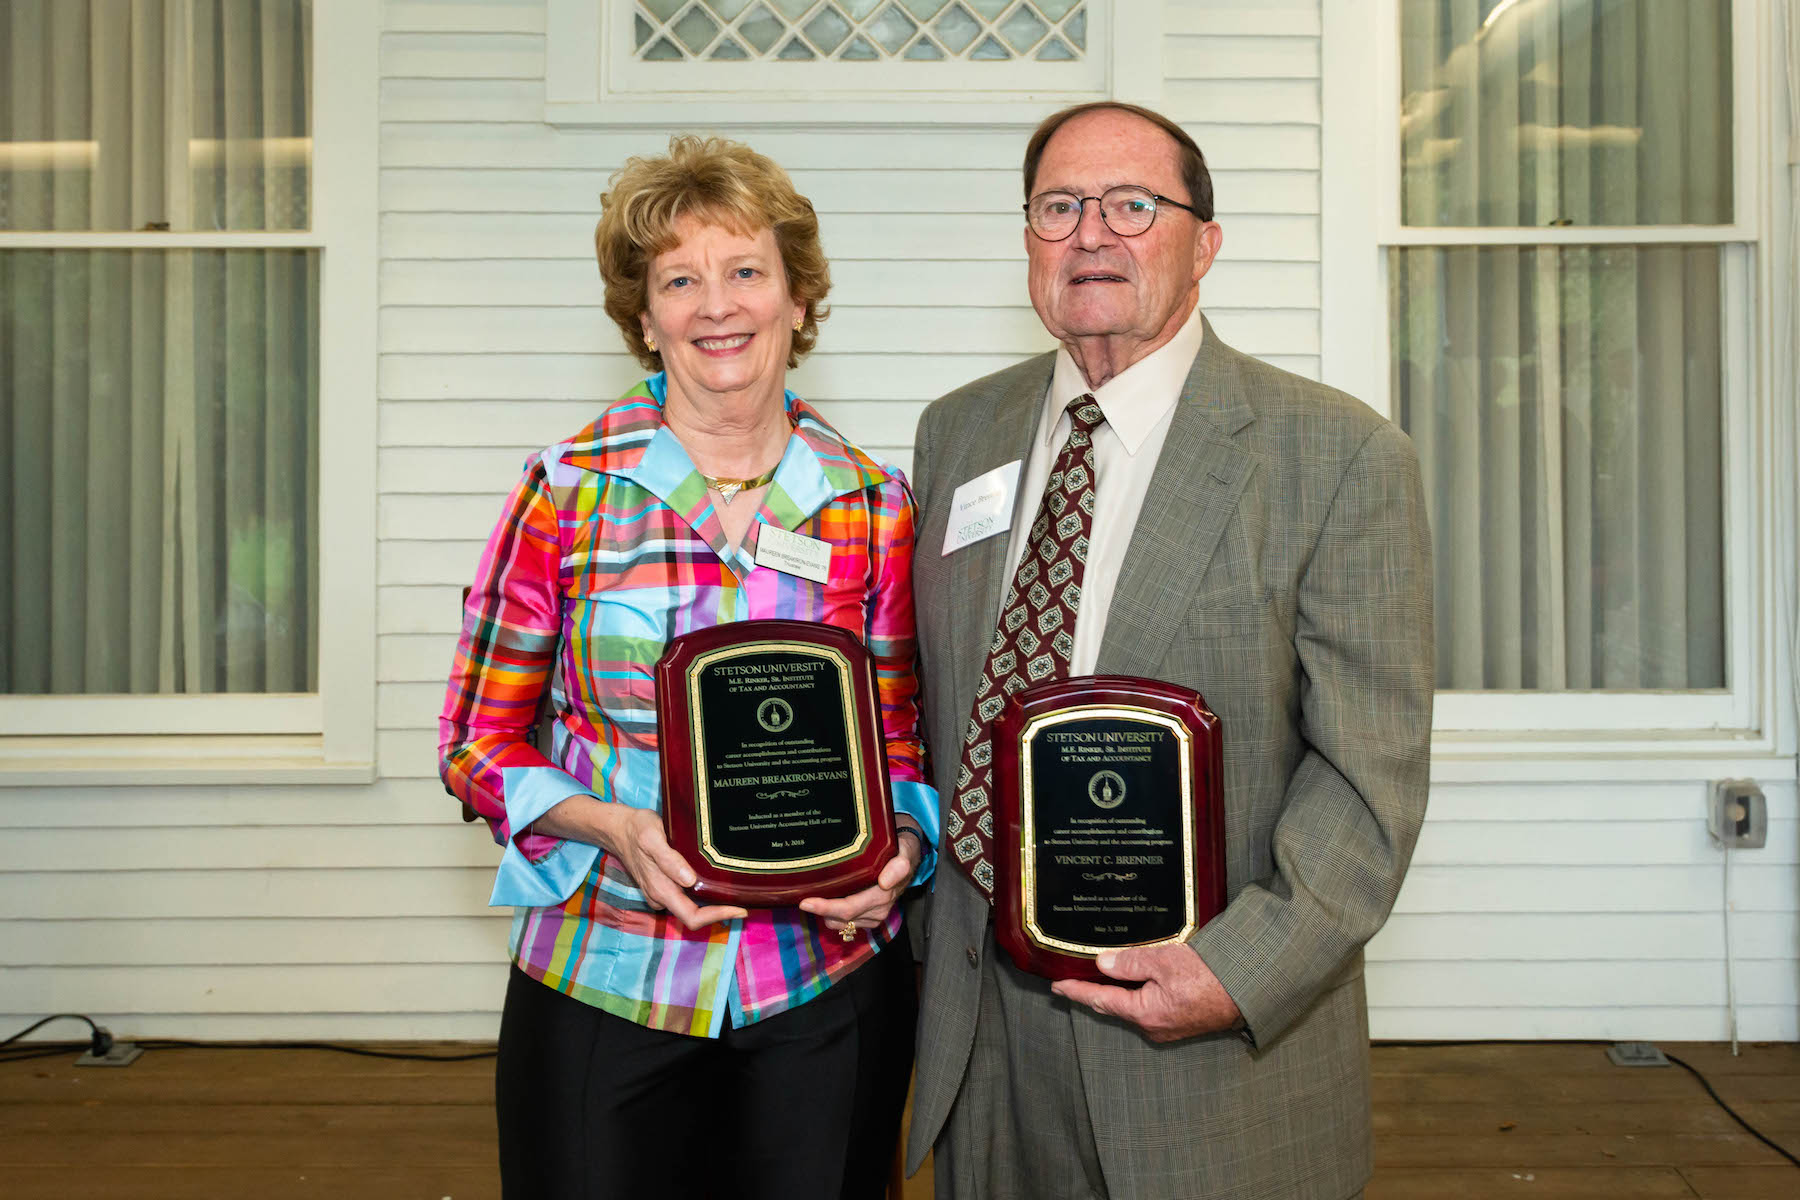 The two stand side by side on a porch holding their plaques.